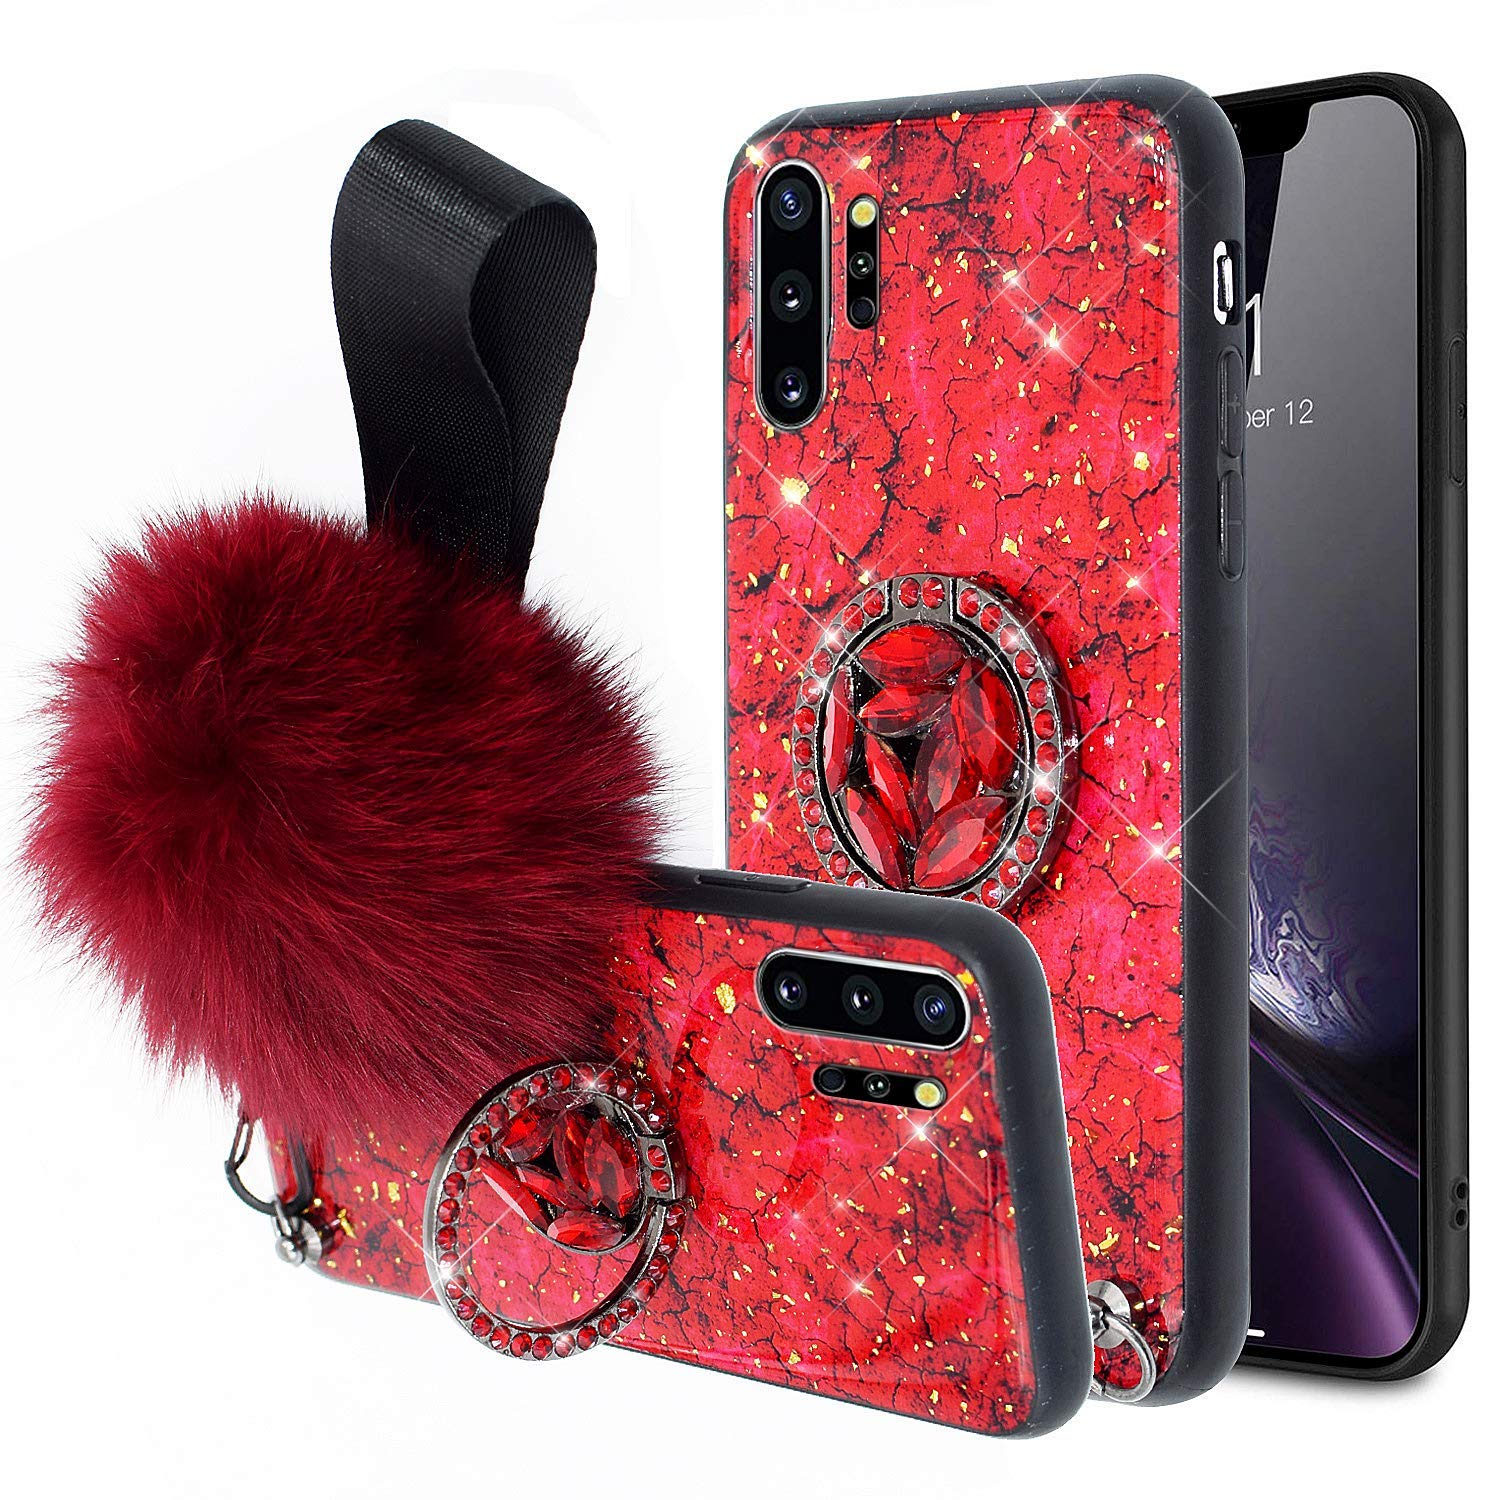 Book Cover Aulzaju for Samsung Note 10 Plus Case with Ring Stand for Girls Womens Super Bling Cute Furry Ball Wrist Strap Lanyard Phone Cover for Note 10 Plus Gold Sparkle Marble Design-Red samsung galaxy note 10 plus Red